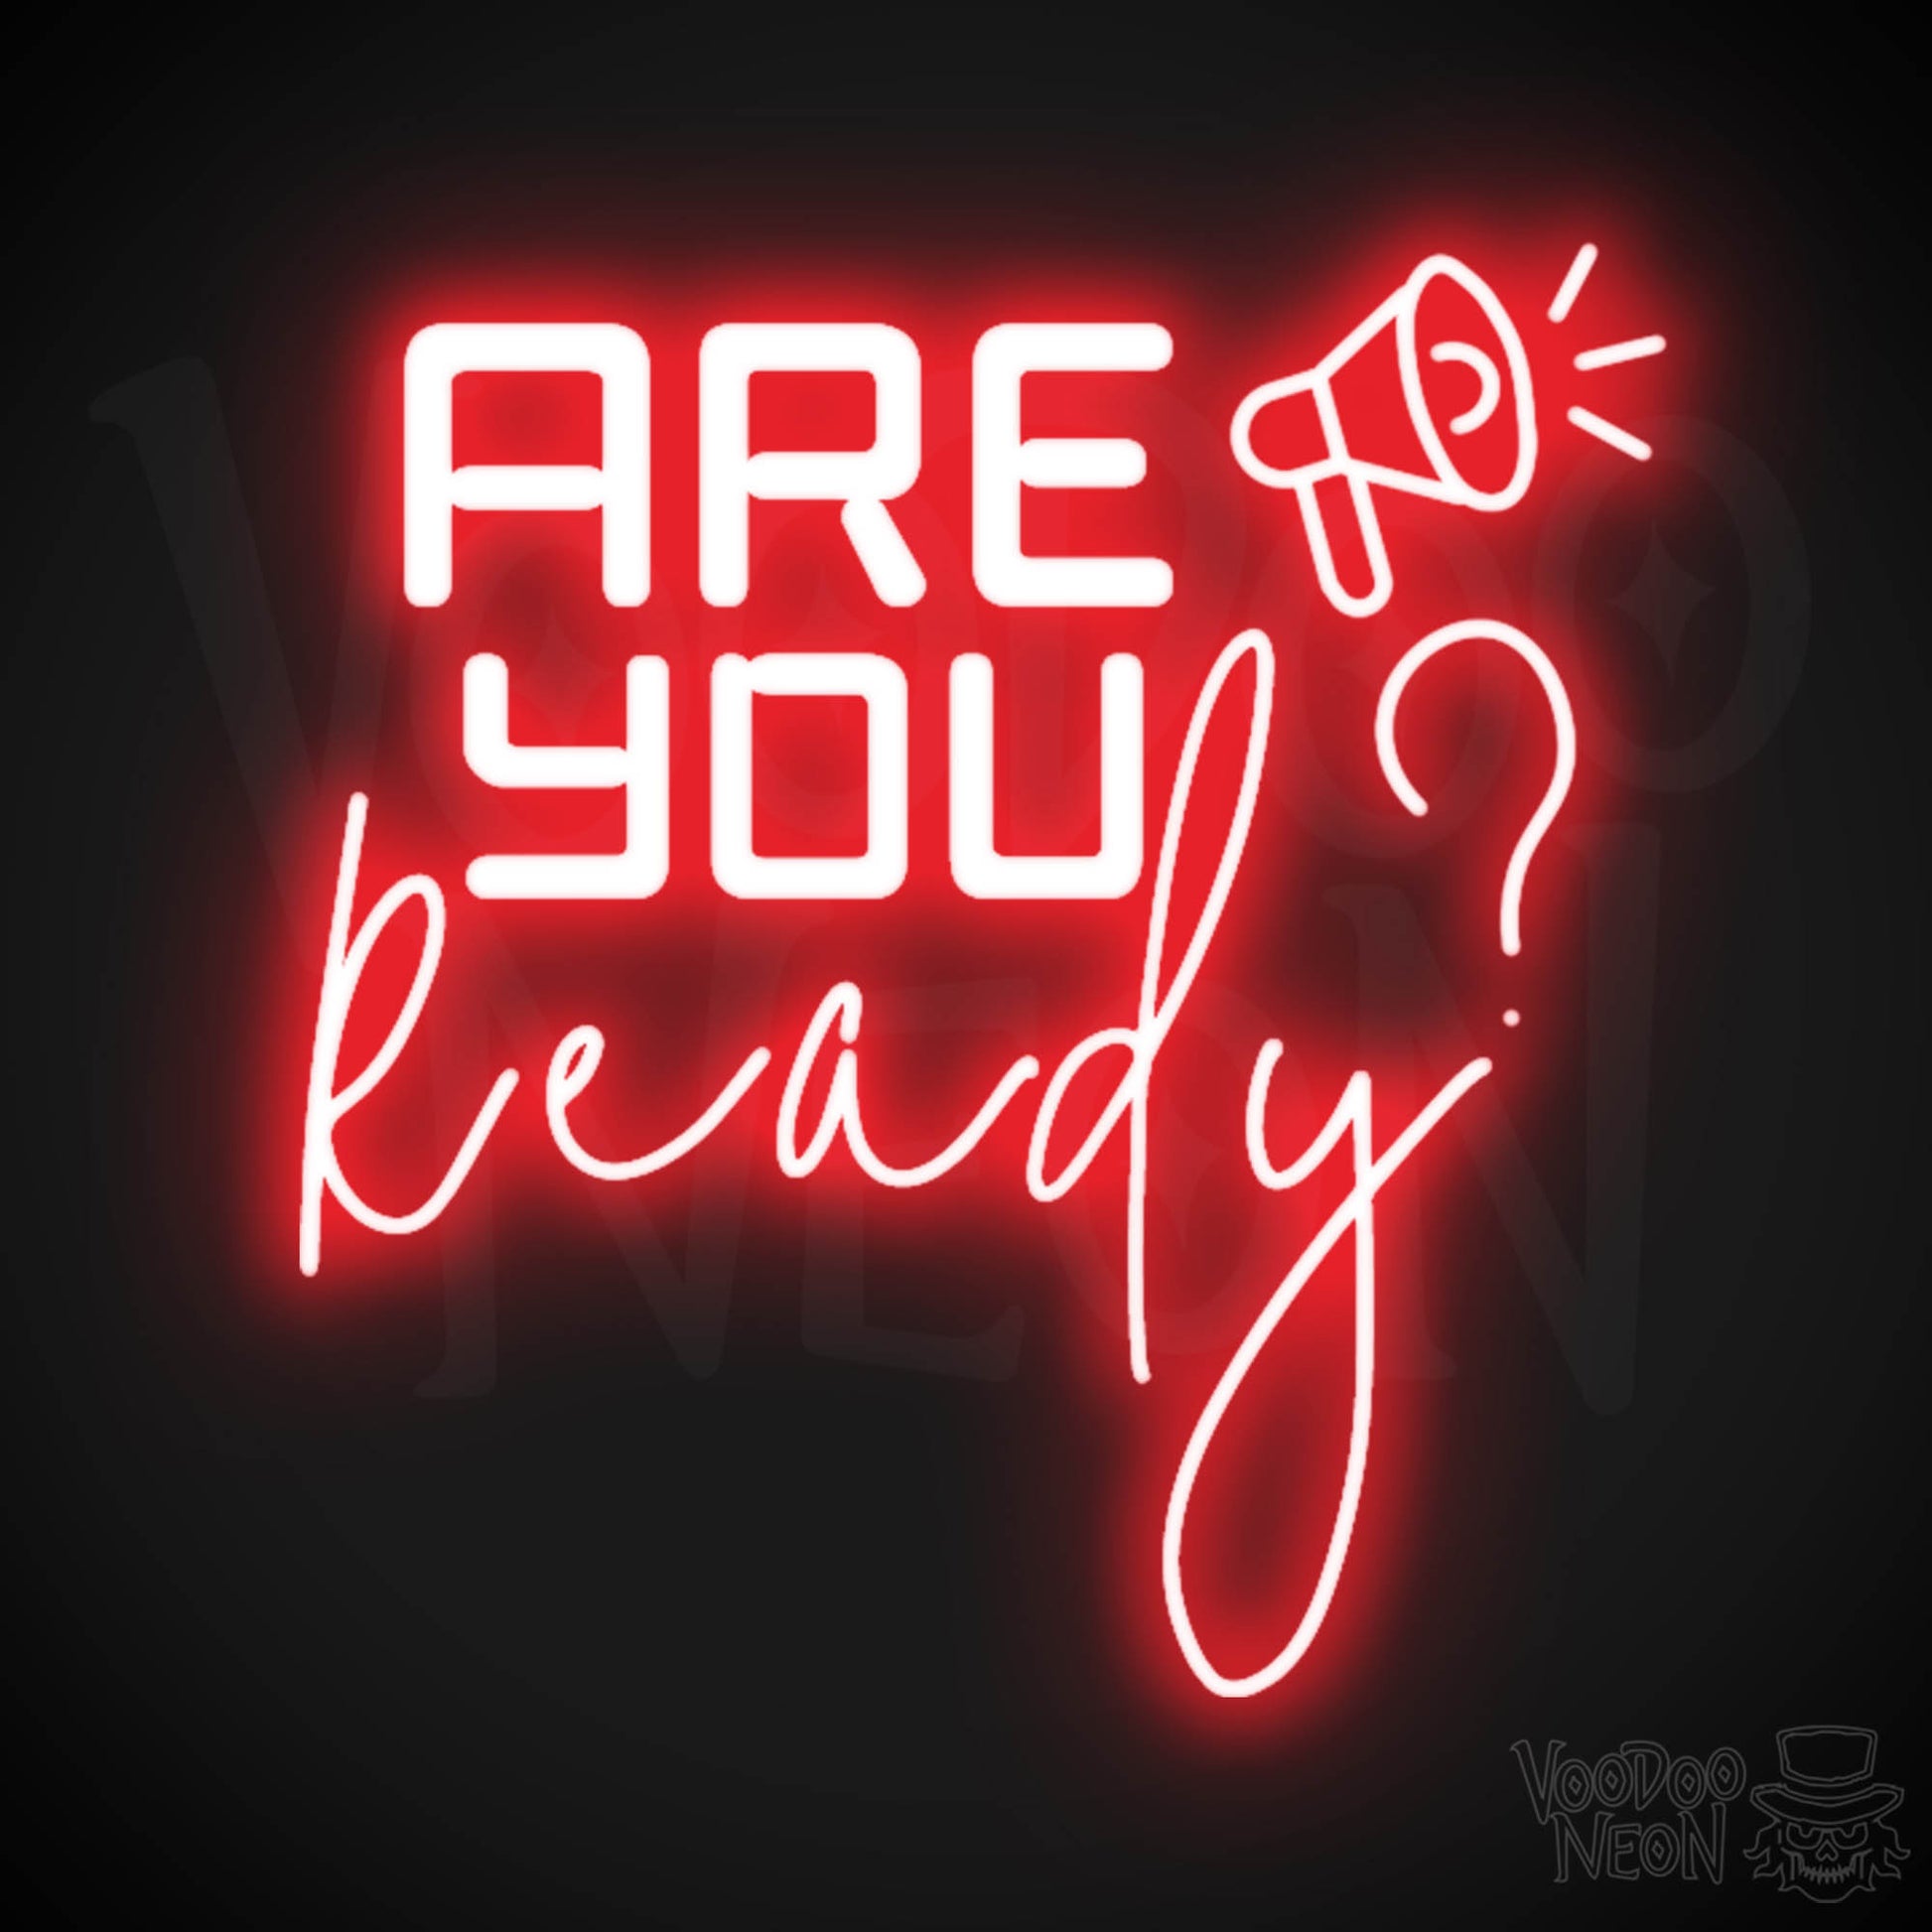 Are You Ready Neon Sign - Neon Are You Ready Sign - LED Wall Art - Color Red